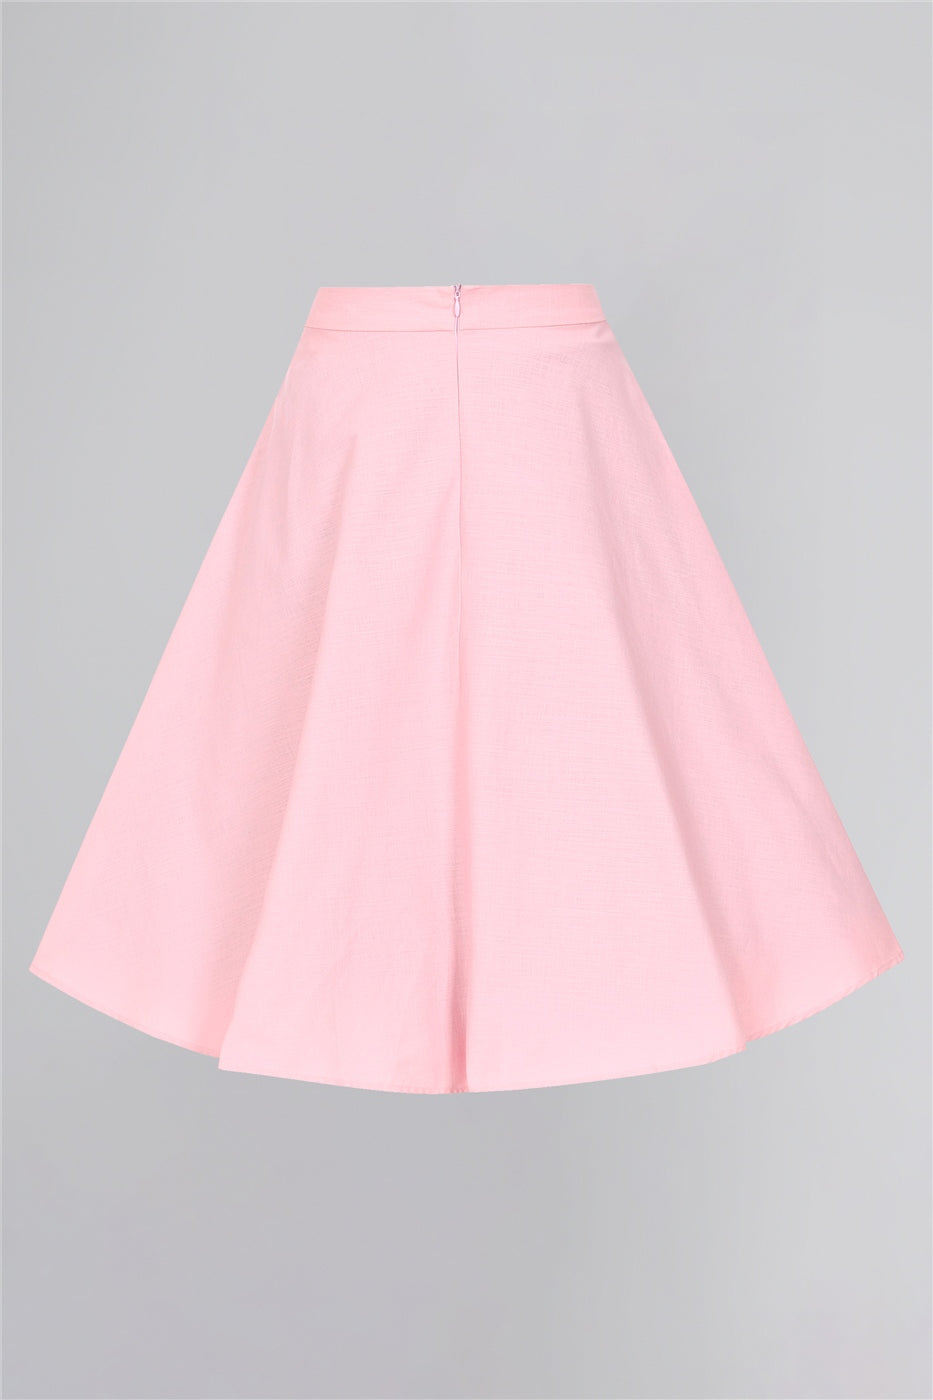 The back of the pink Cupid skirt